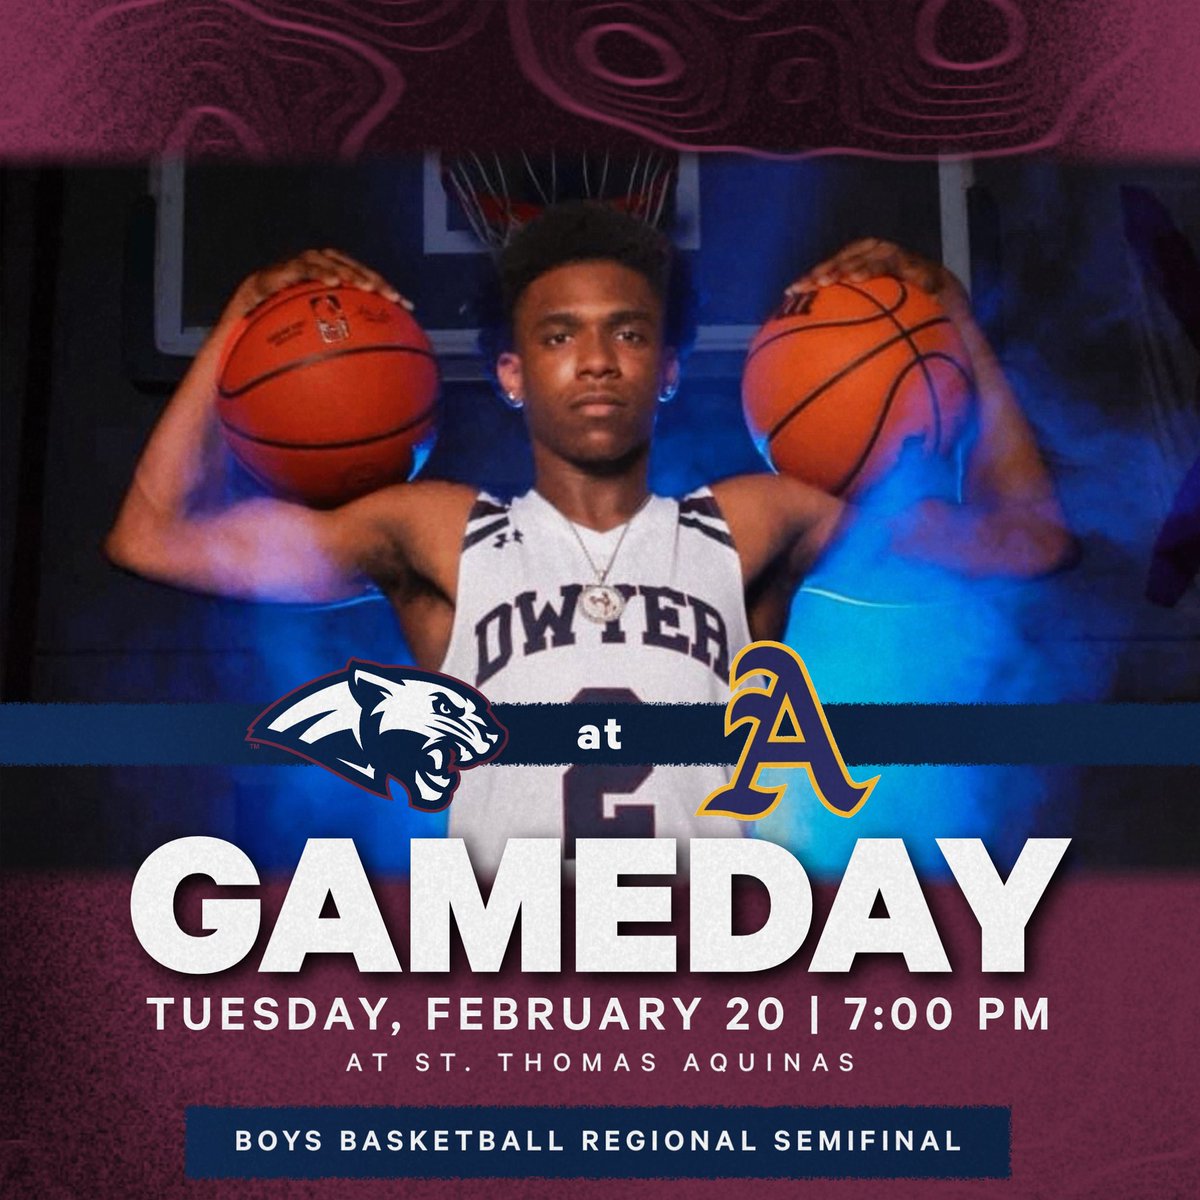 Dwyer Boys Basketball travel to St. Thomas Aquinas tomorrow (Tuesday, Feb. 20th) for the Regional Semifinal game. Tip off 7pm, and tickets available on GoFan.co
#WeAreDwyer #GoPanthers